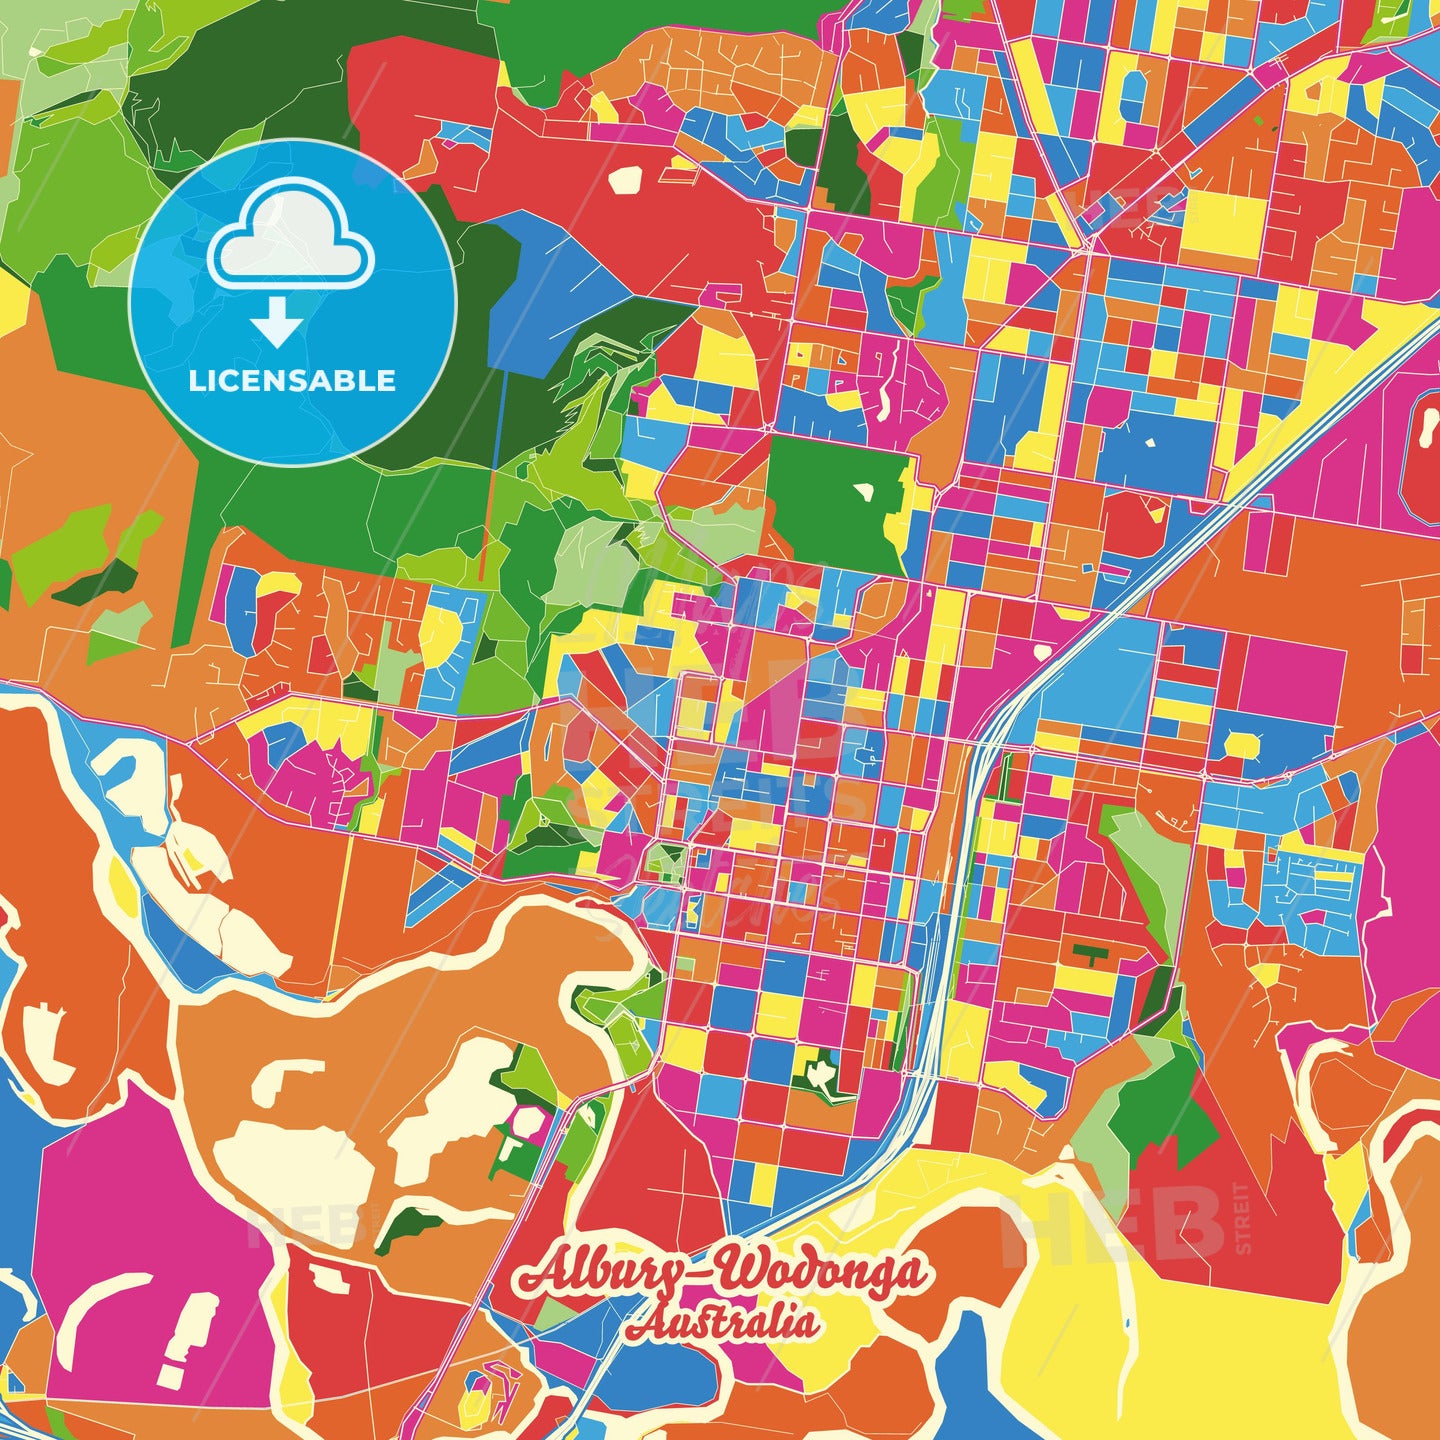 Albury–Wodonga, Australia Crazy Colorful Street Map Poster Template - HEBSTREITS Sketches